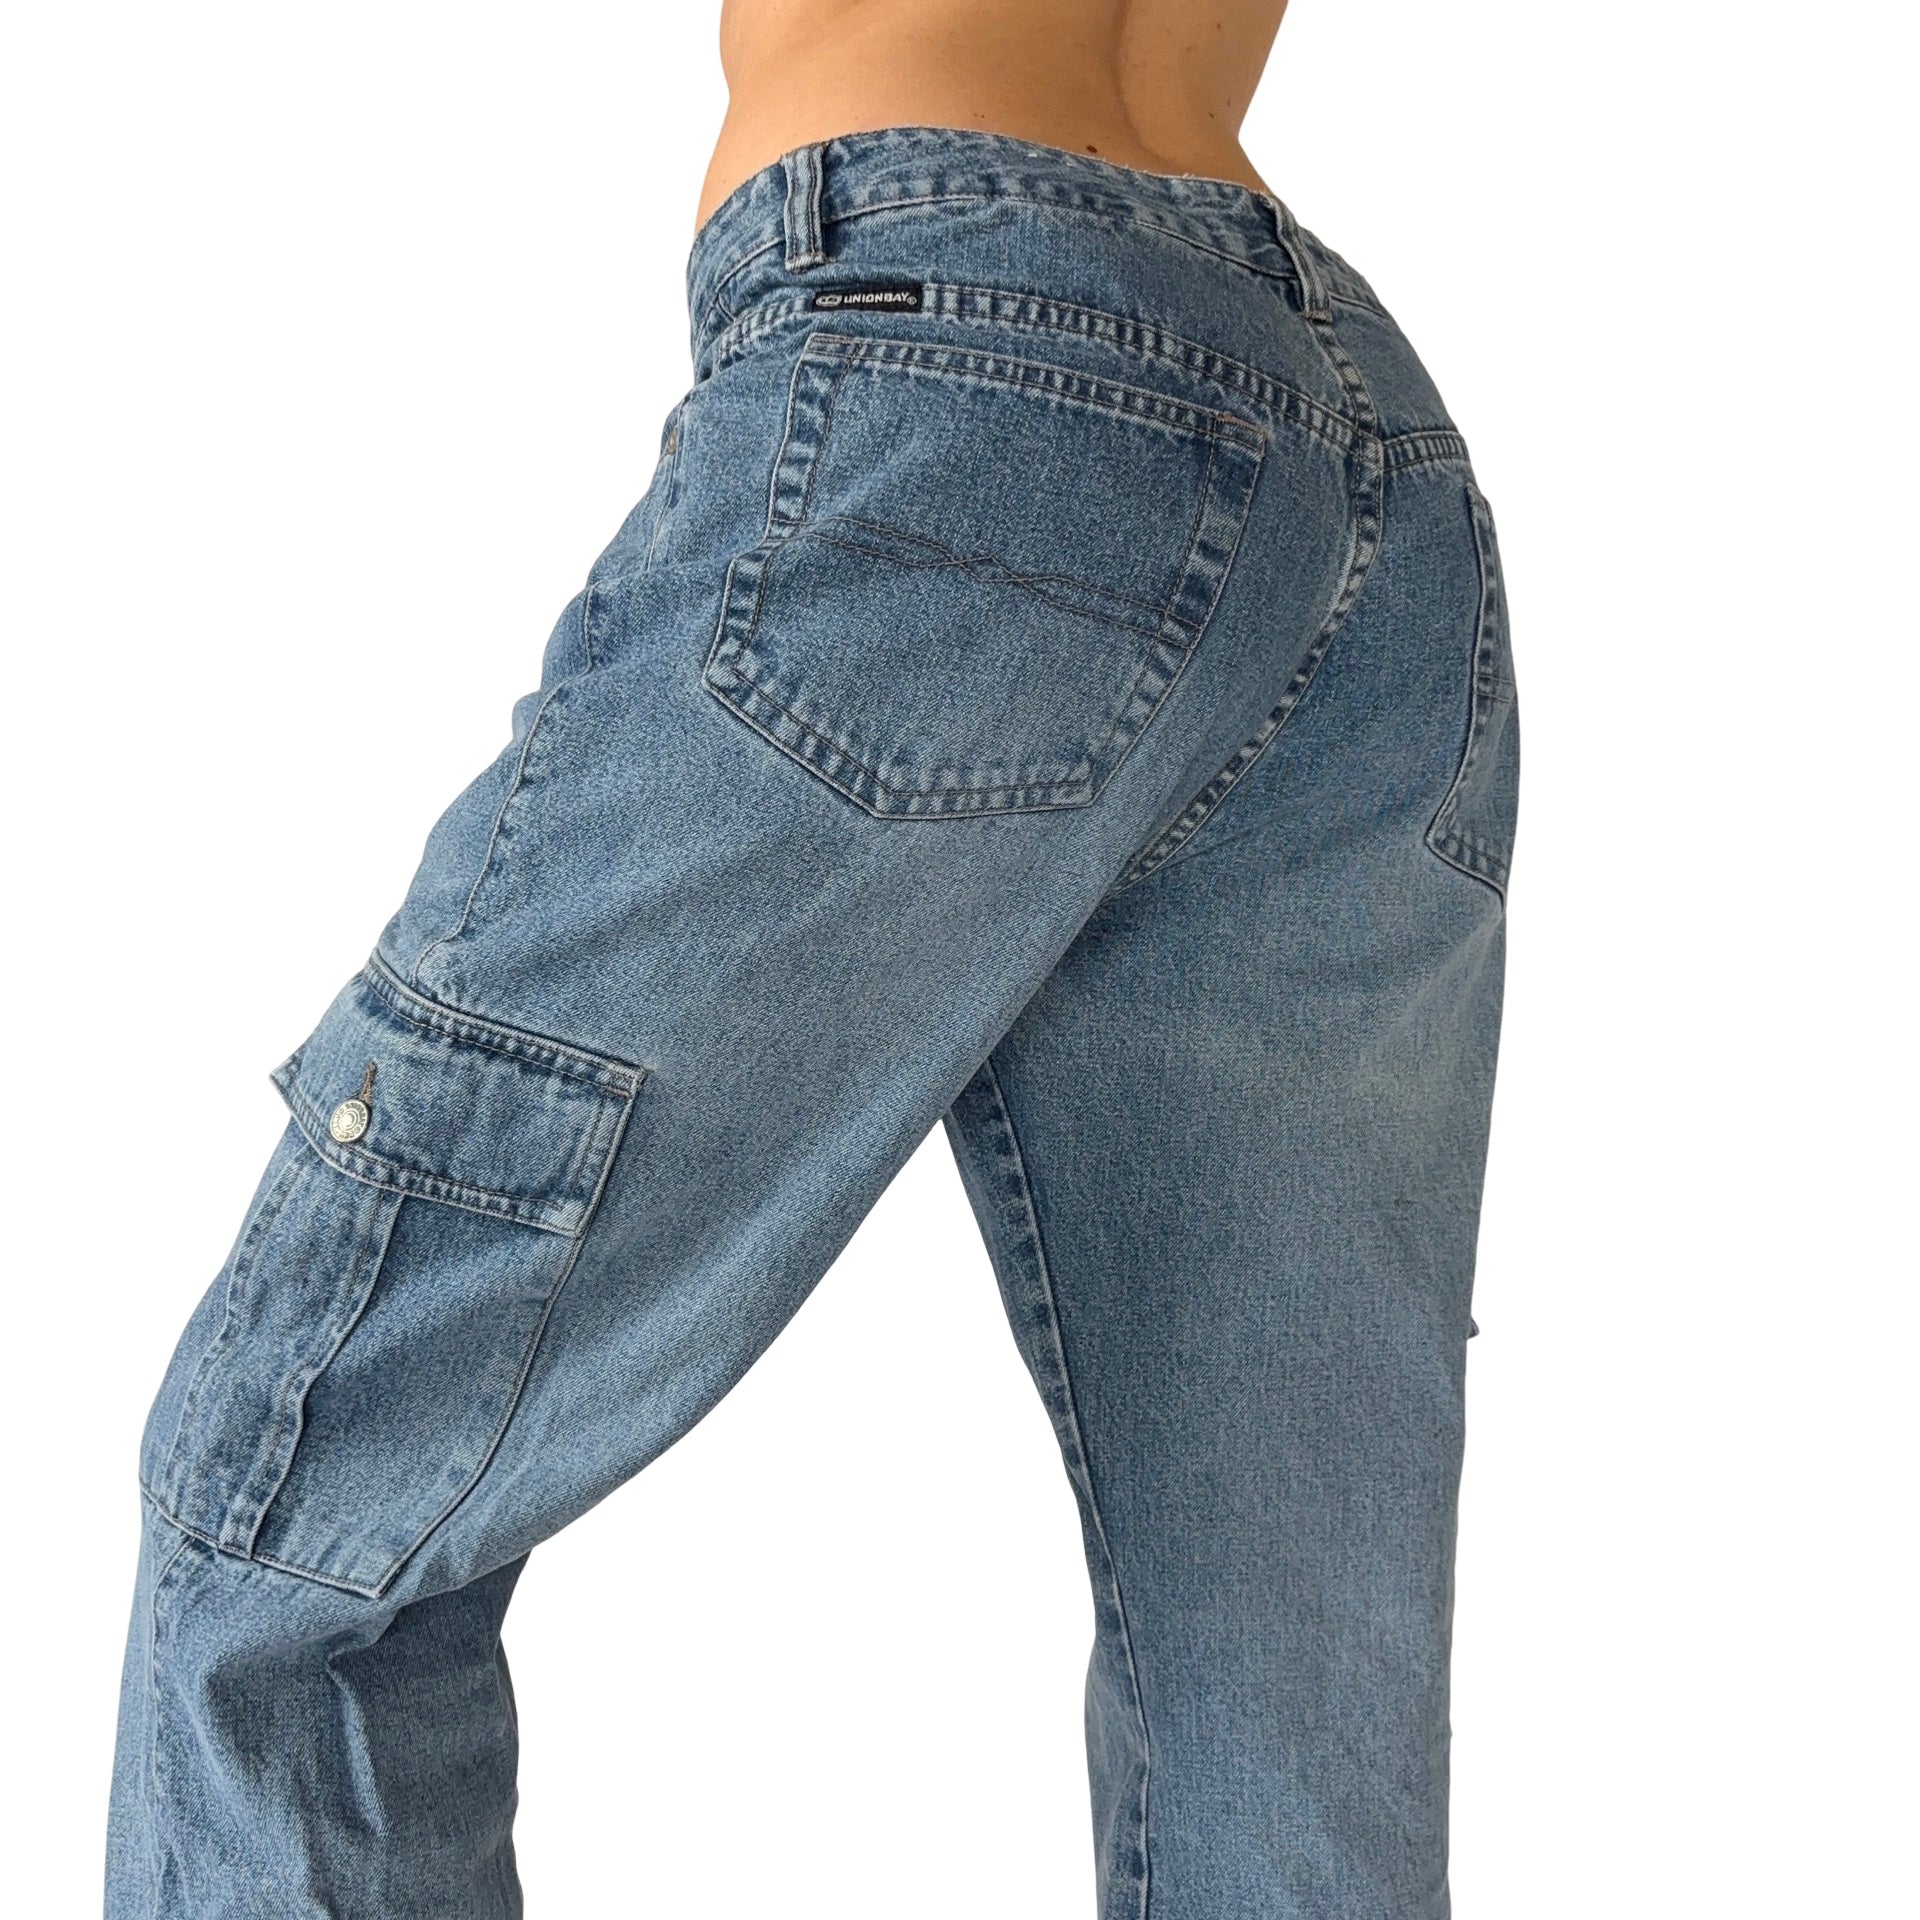 90s Cargo Jeans (M)